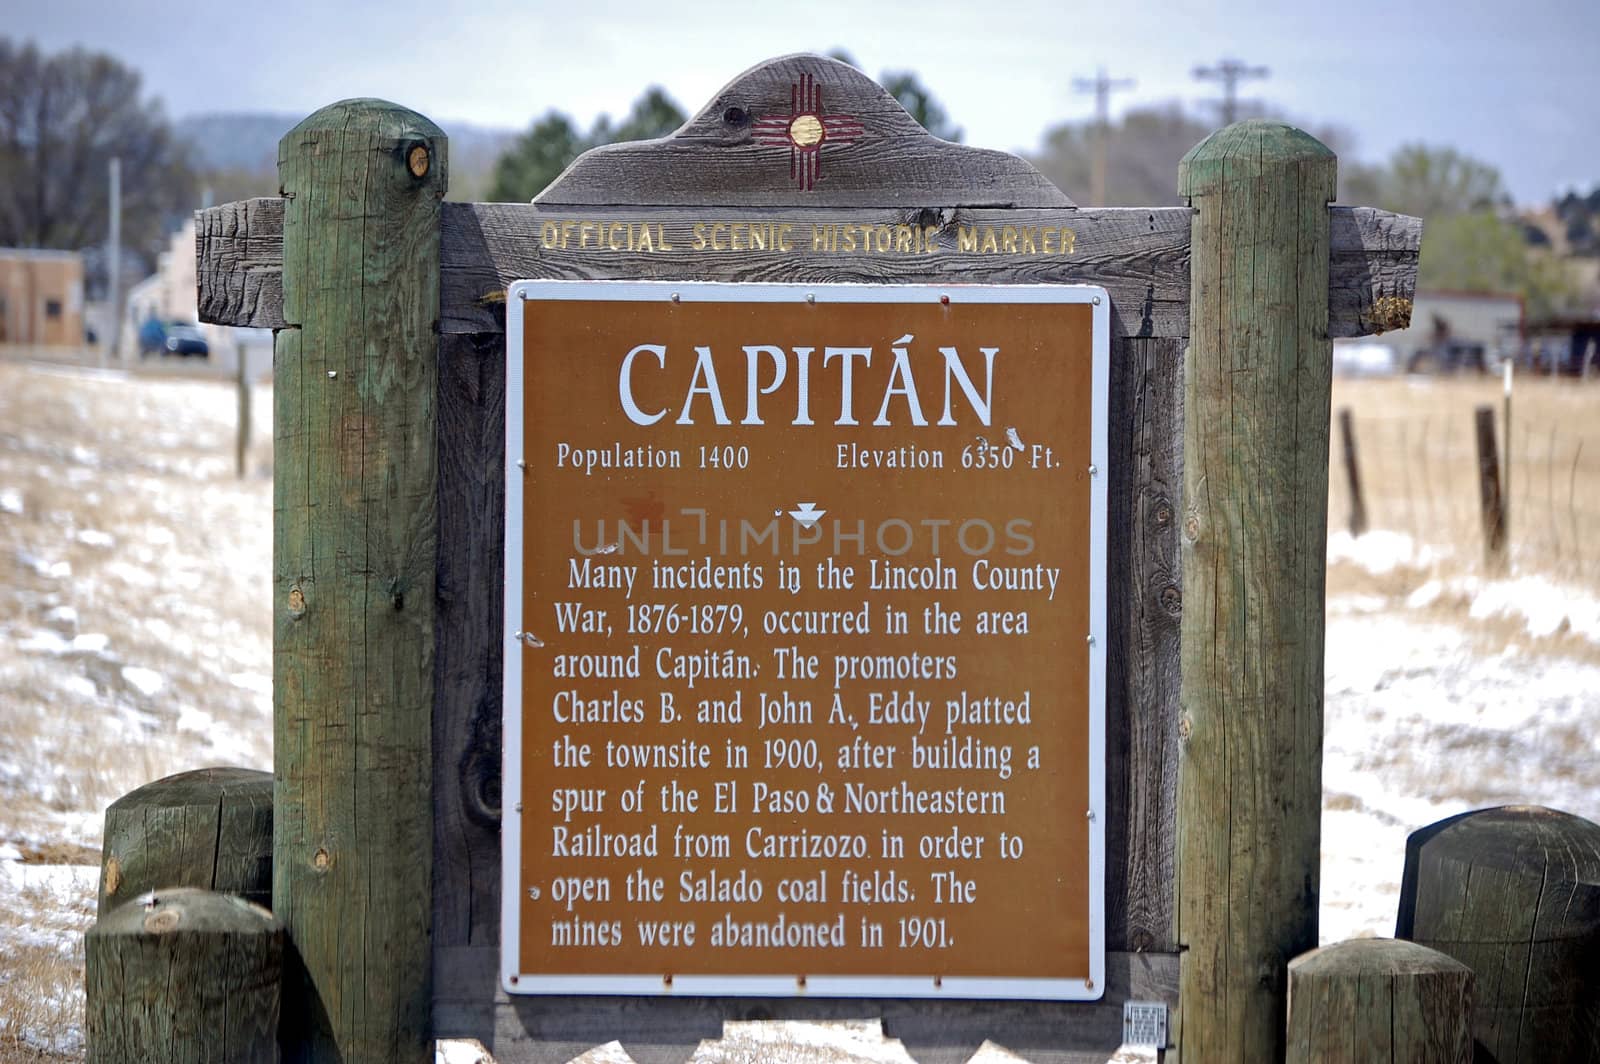 Capitan official scenic historic marker by RefocusPhoto